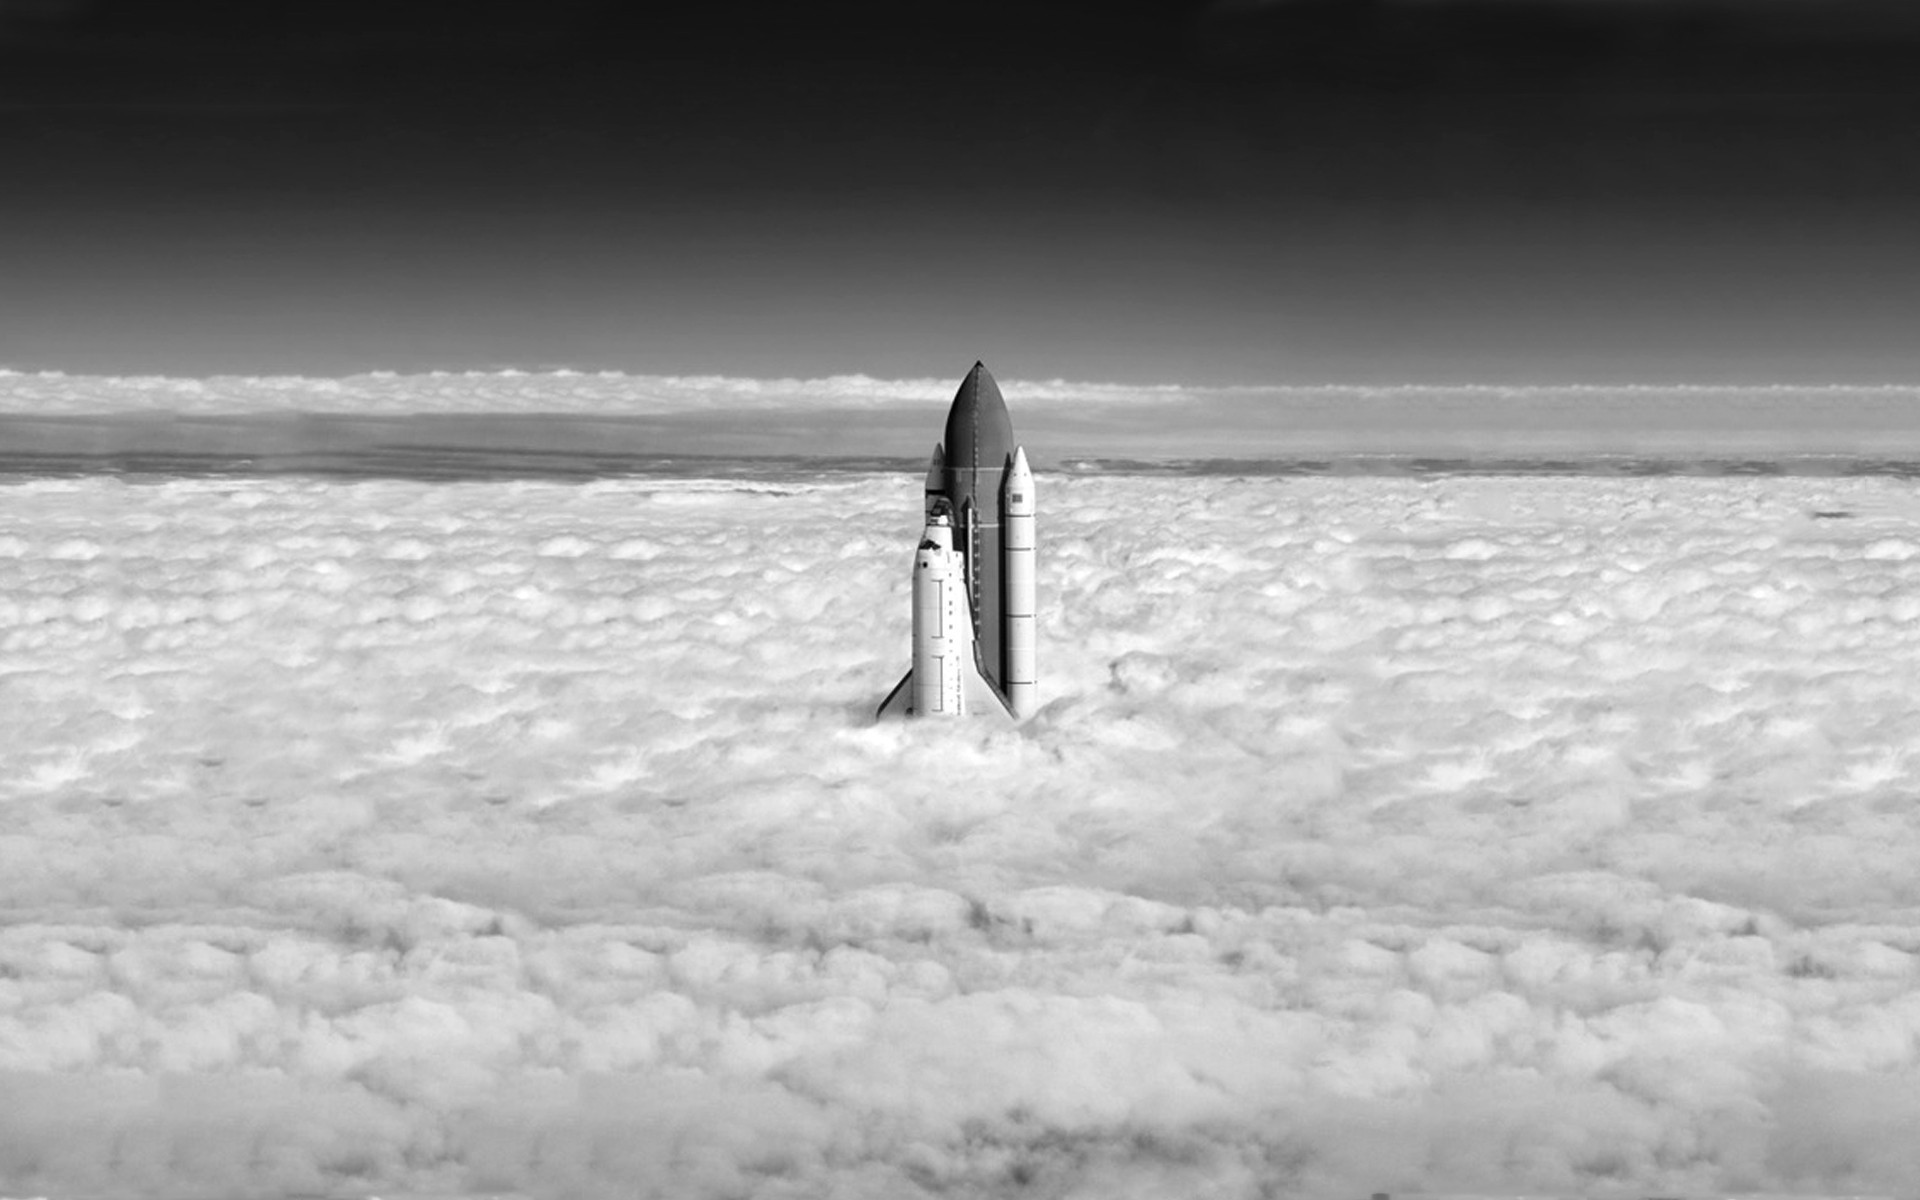 General 1920x1200 space shuttle monochrome vehicle space clouds